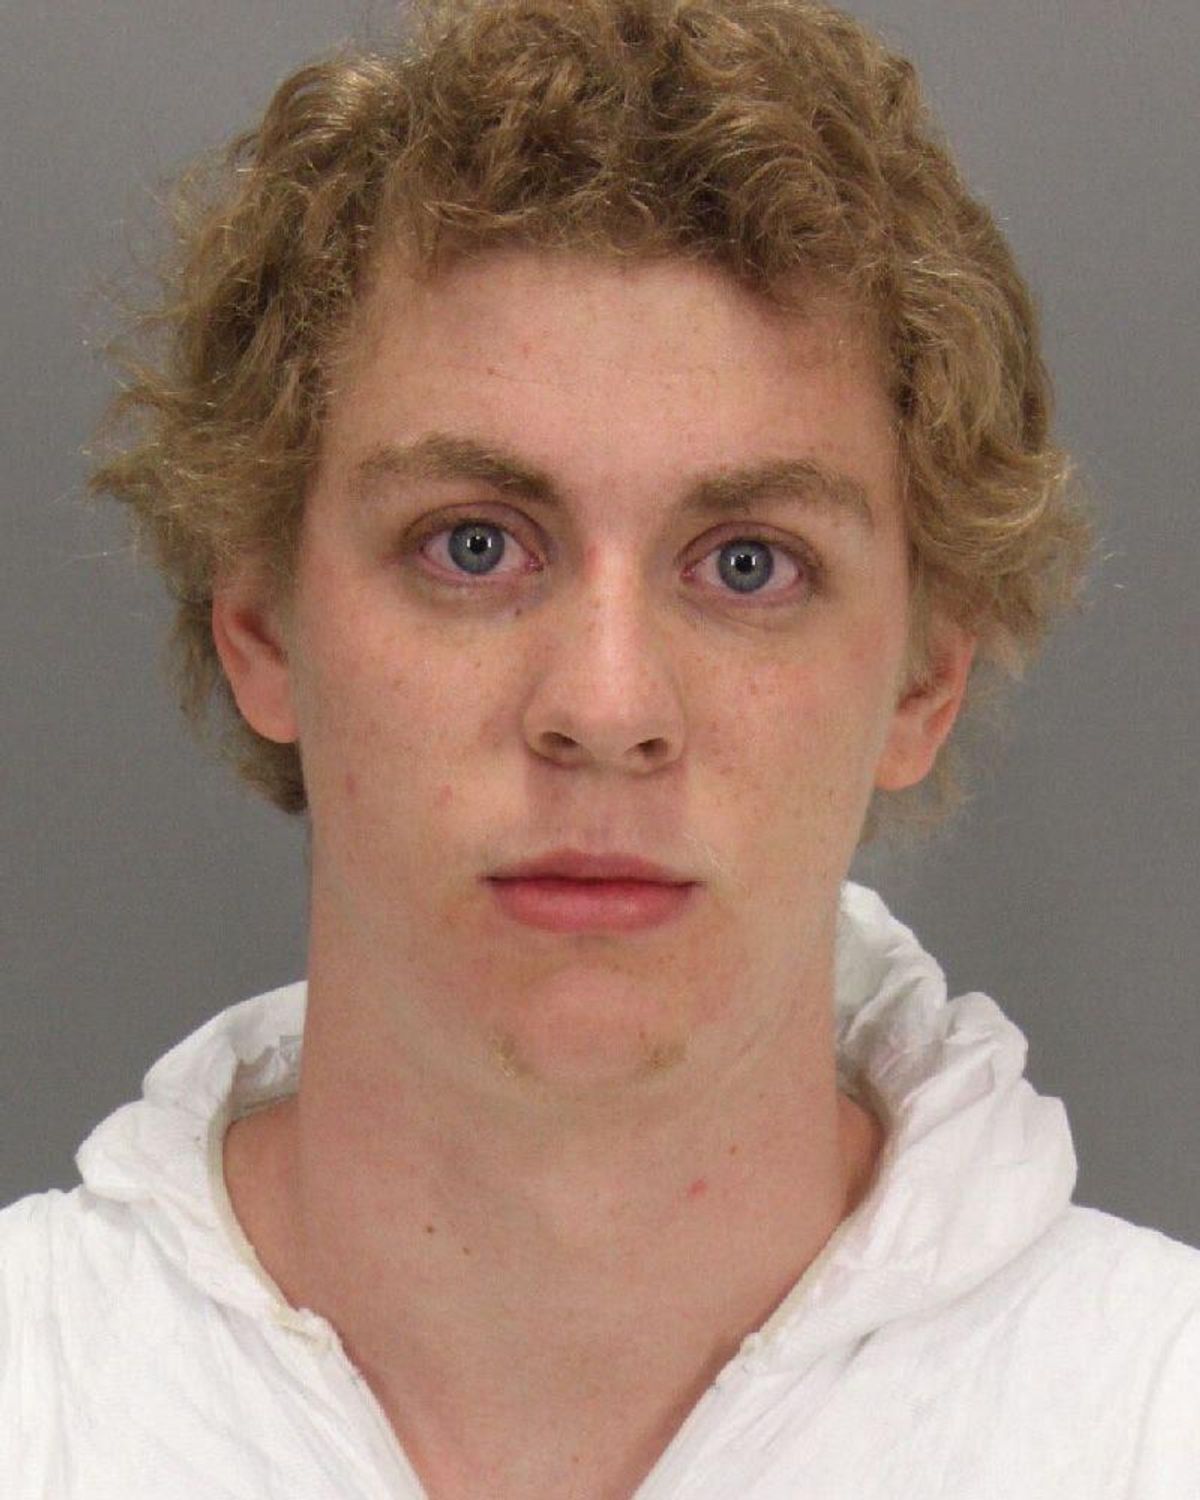 When Will Brock Turner Pay?